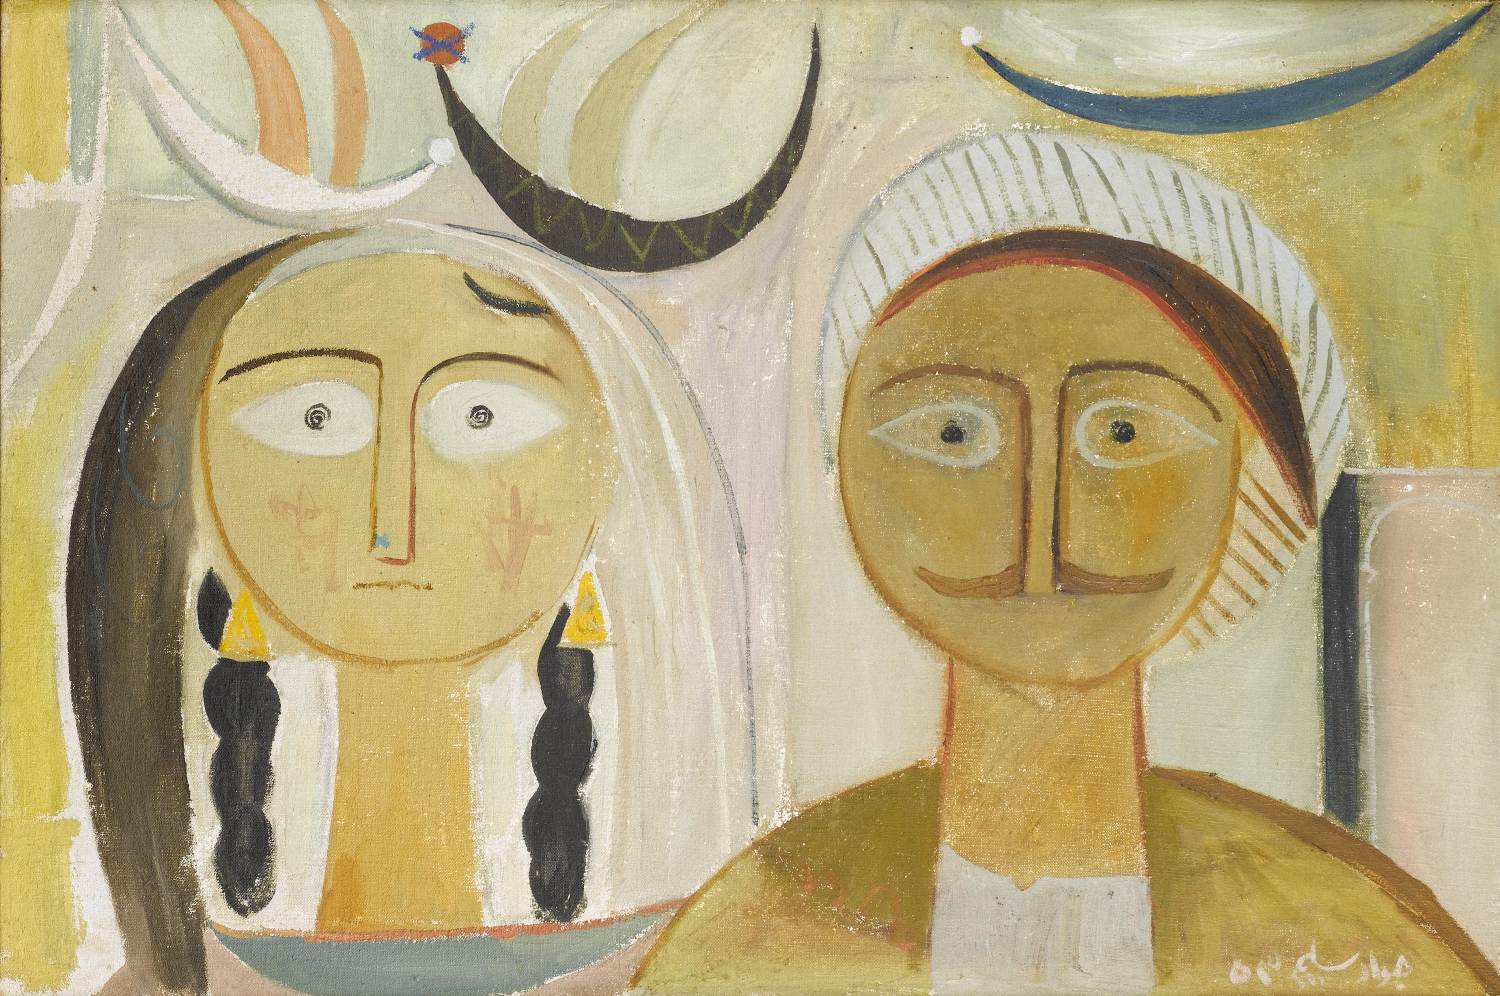 Young Man And His Wife by Jewad Selim, 1953